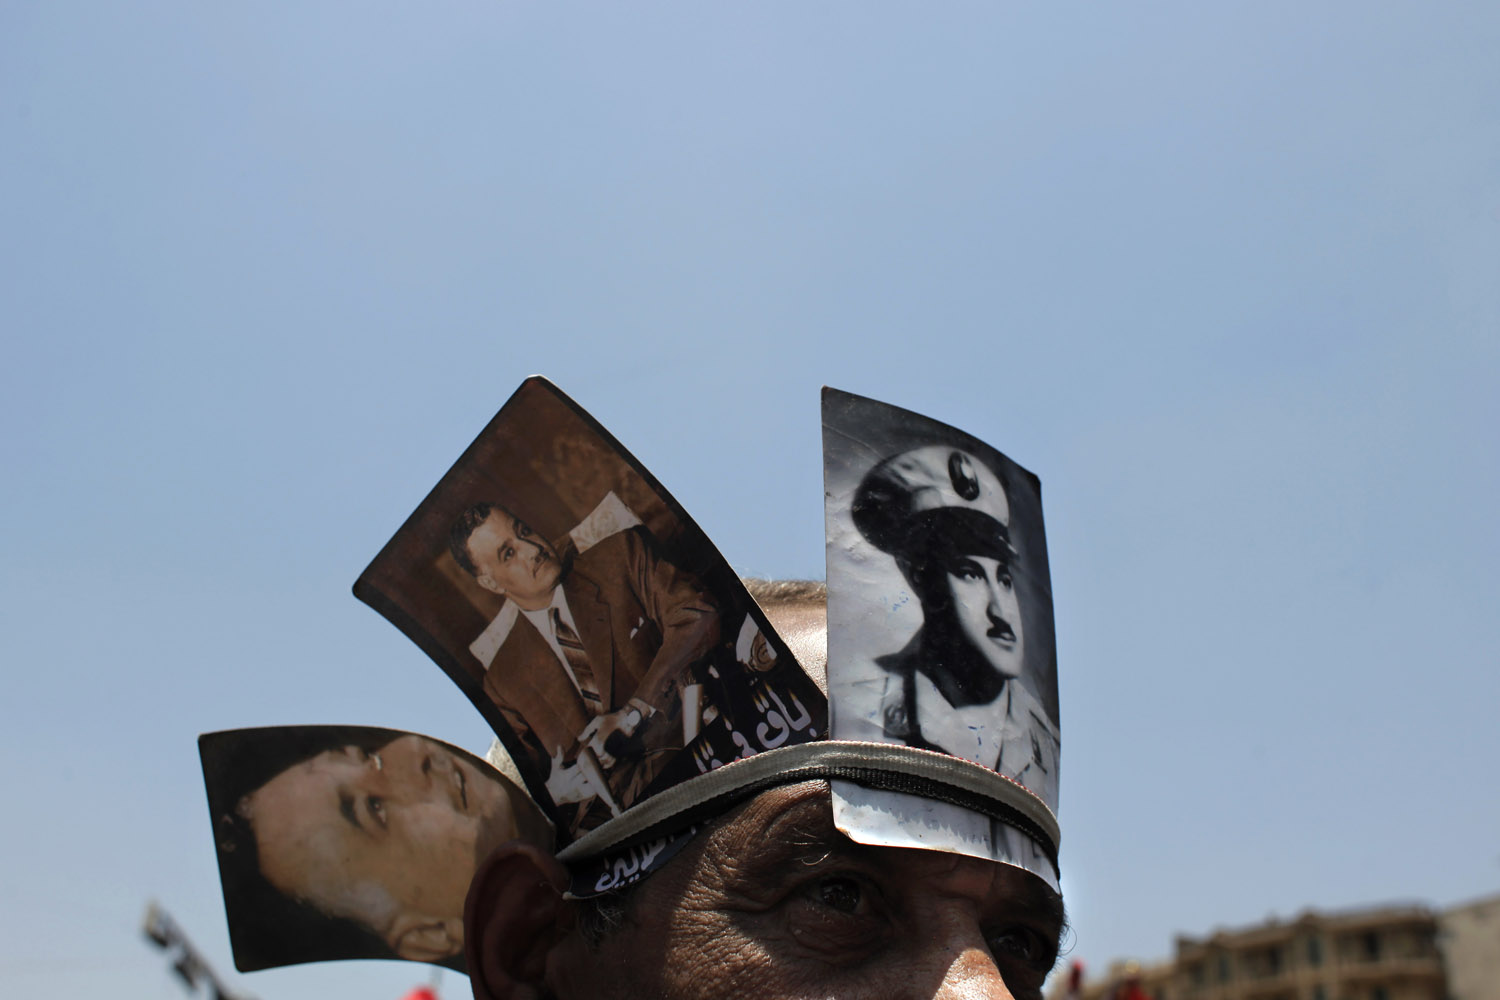 June 8, 2012. An Egyptian protester, wearing pictures of late Egyptian President Gamal Abdel Nasser on his head, attends a demonstration at Tahrir Square, Cairo, Egypt.